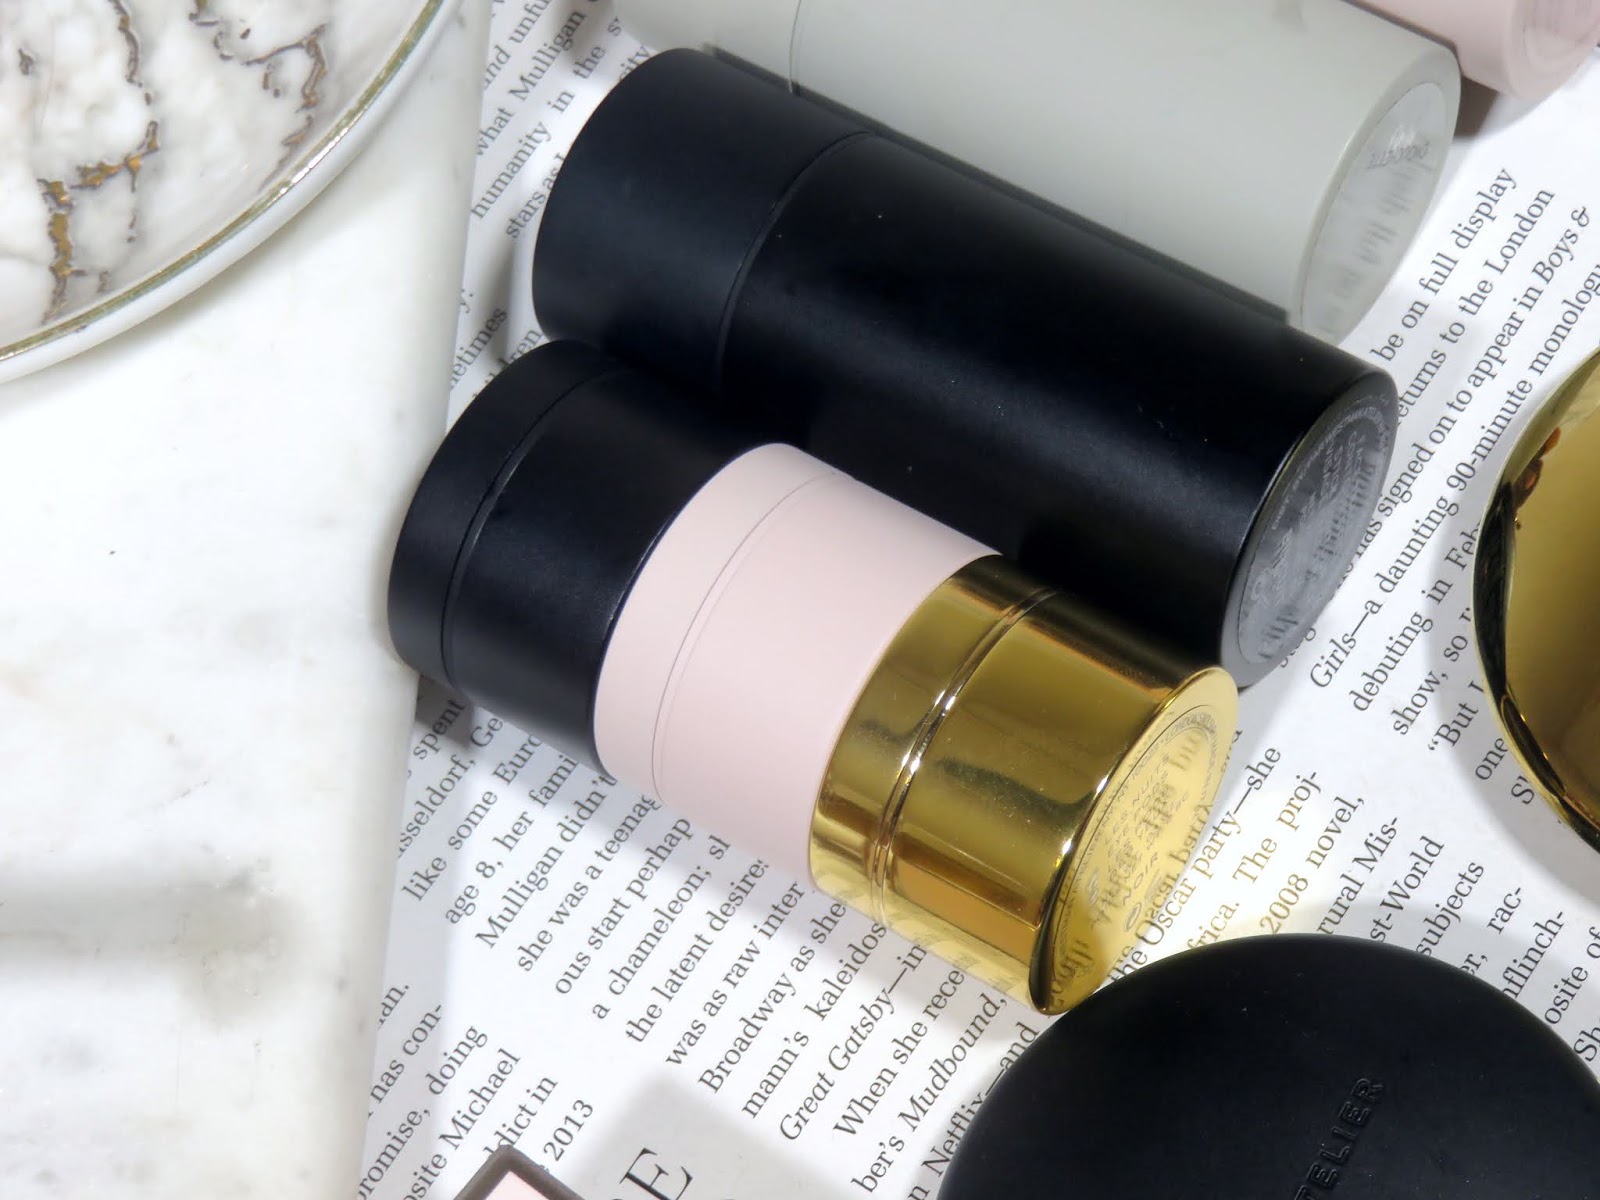 Westman Atelier Eye Pods in Les Nuits Review and Swatches